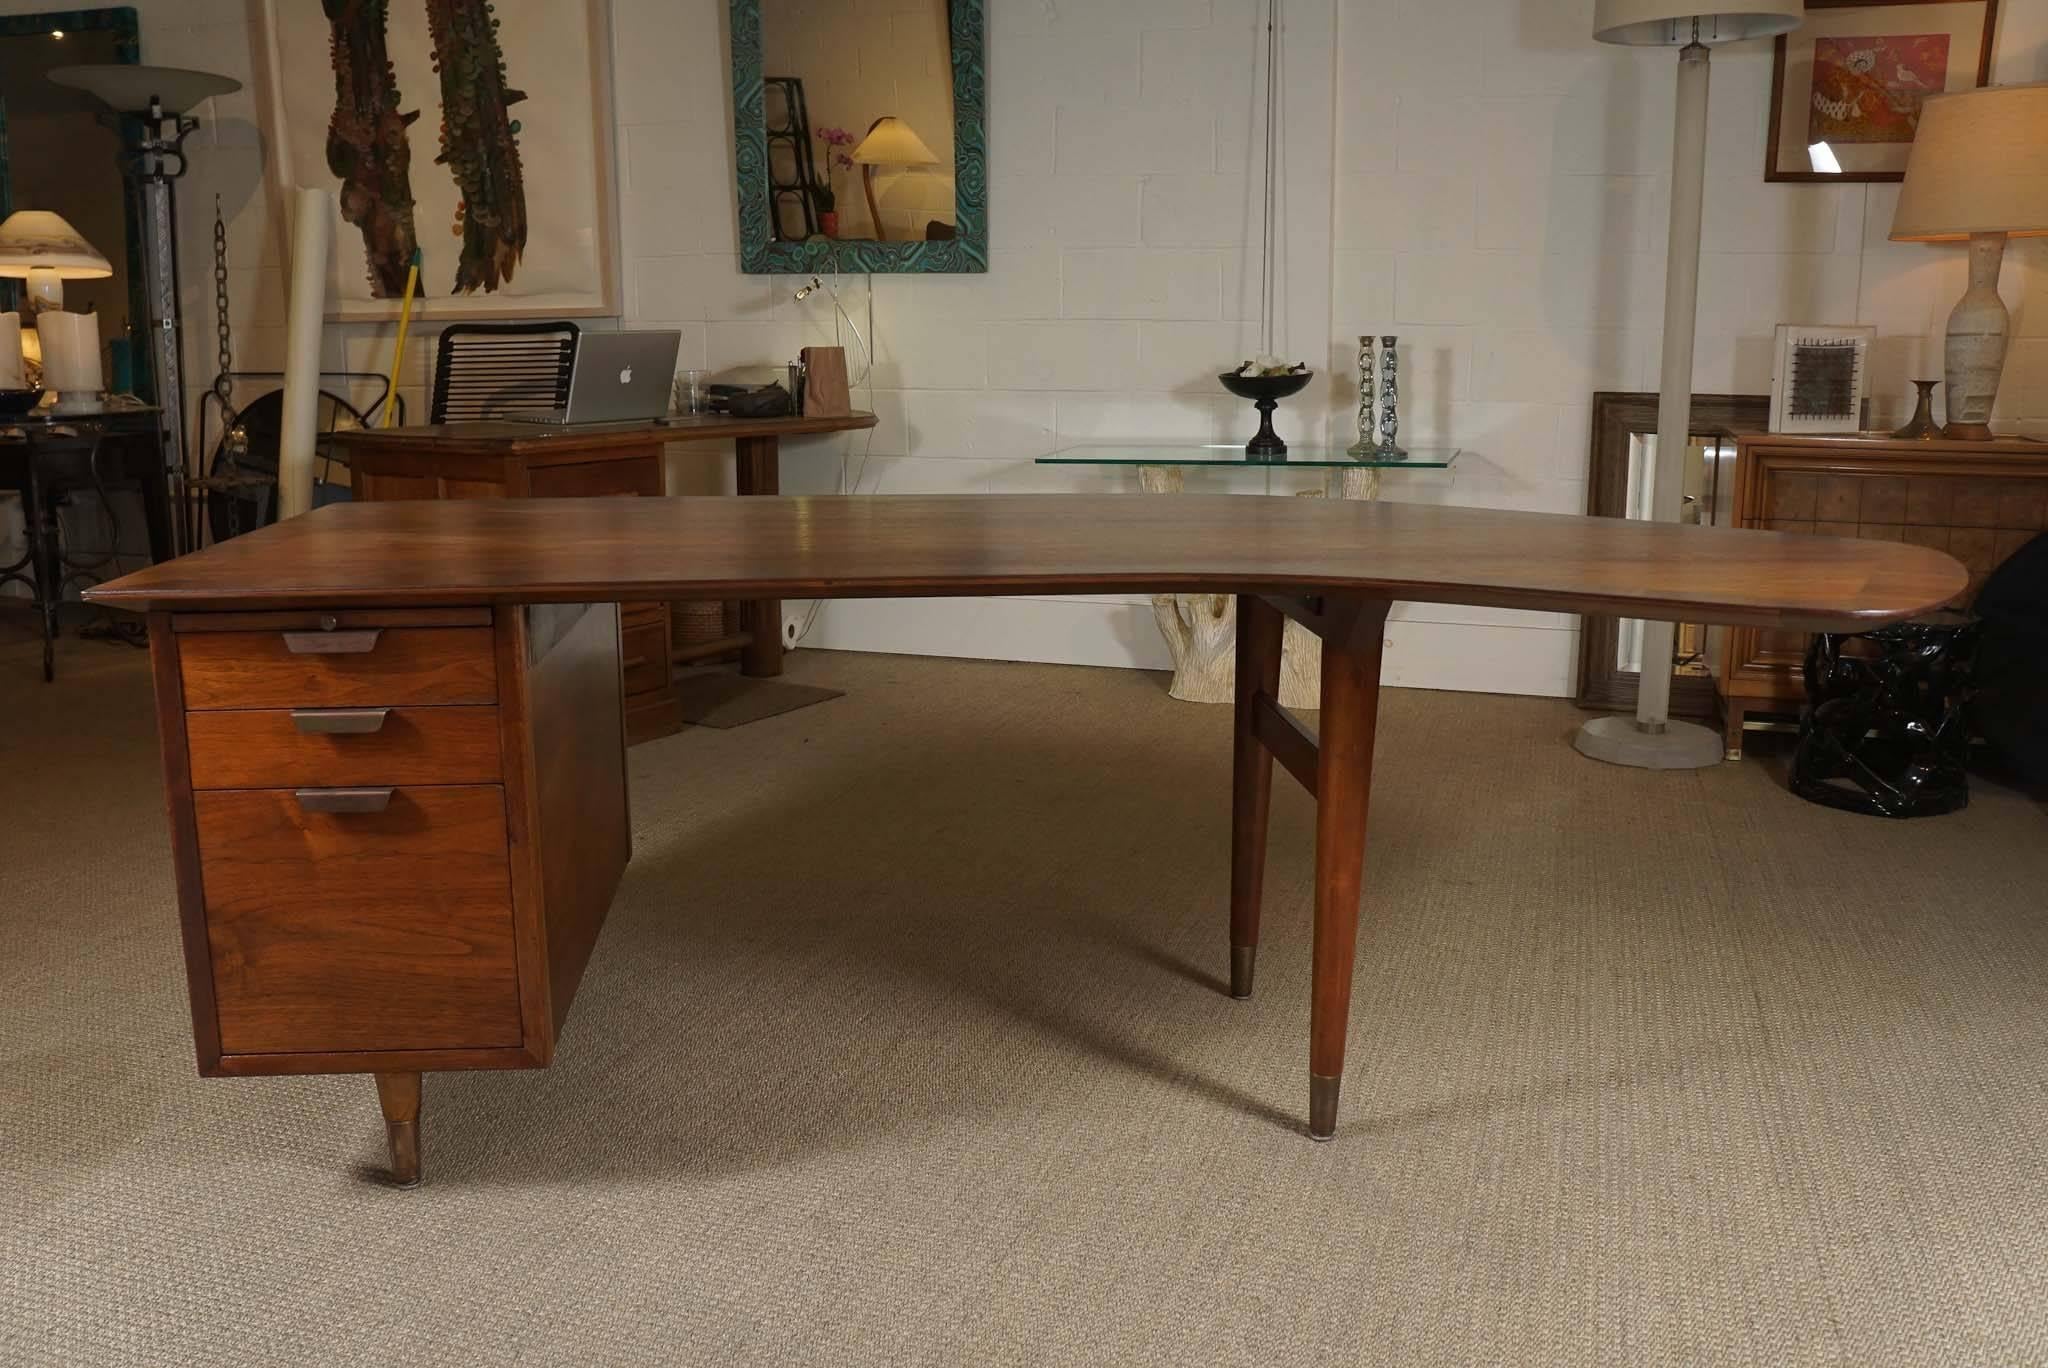 Here is a great Modern desk in walnut with a large boomerang top.
The desk has three drawers including a built in file drawer. There is also a pull-out tray. The top has a surround marquetry border.